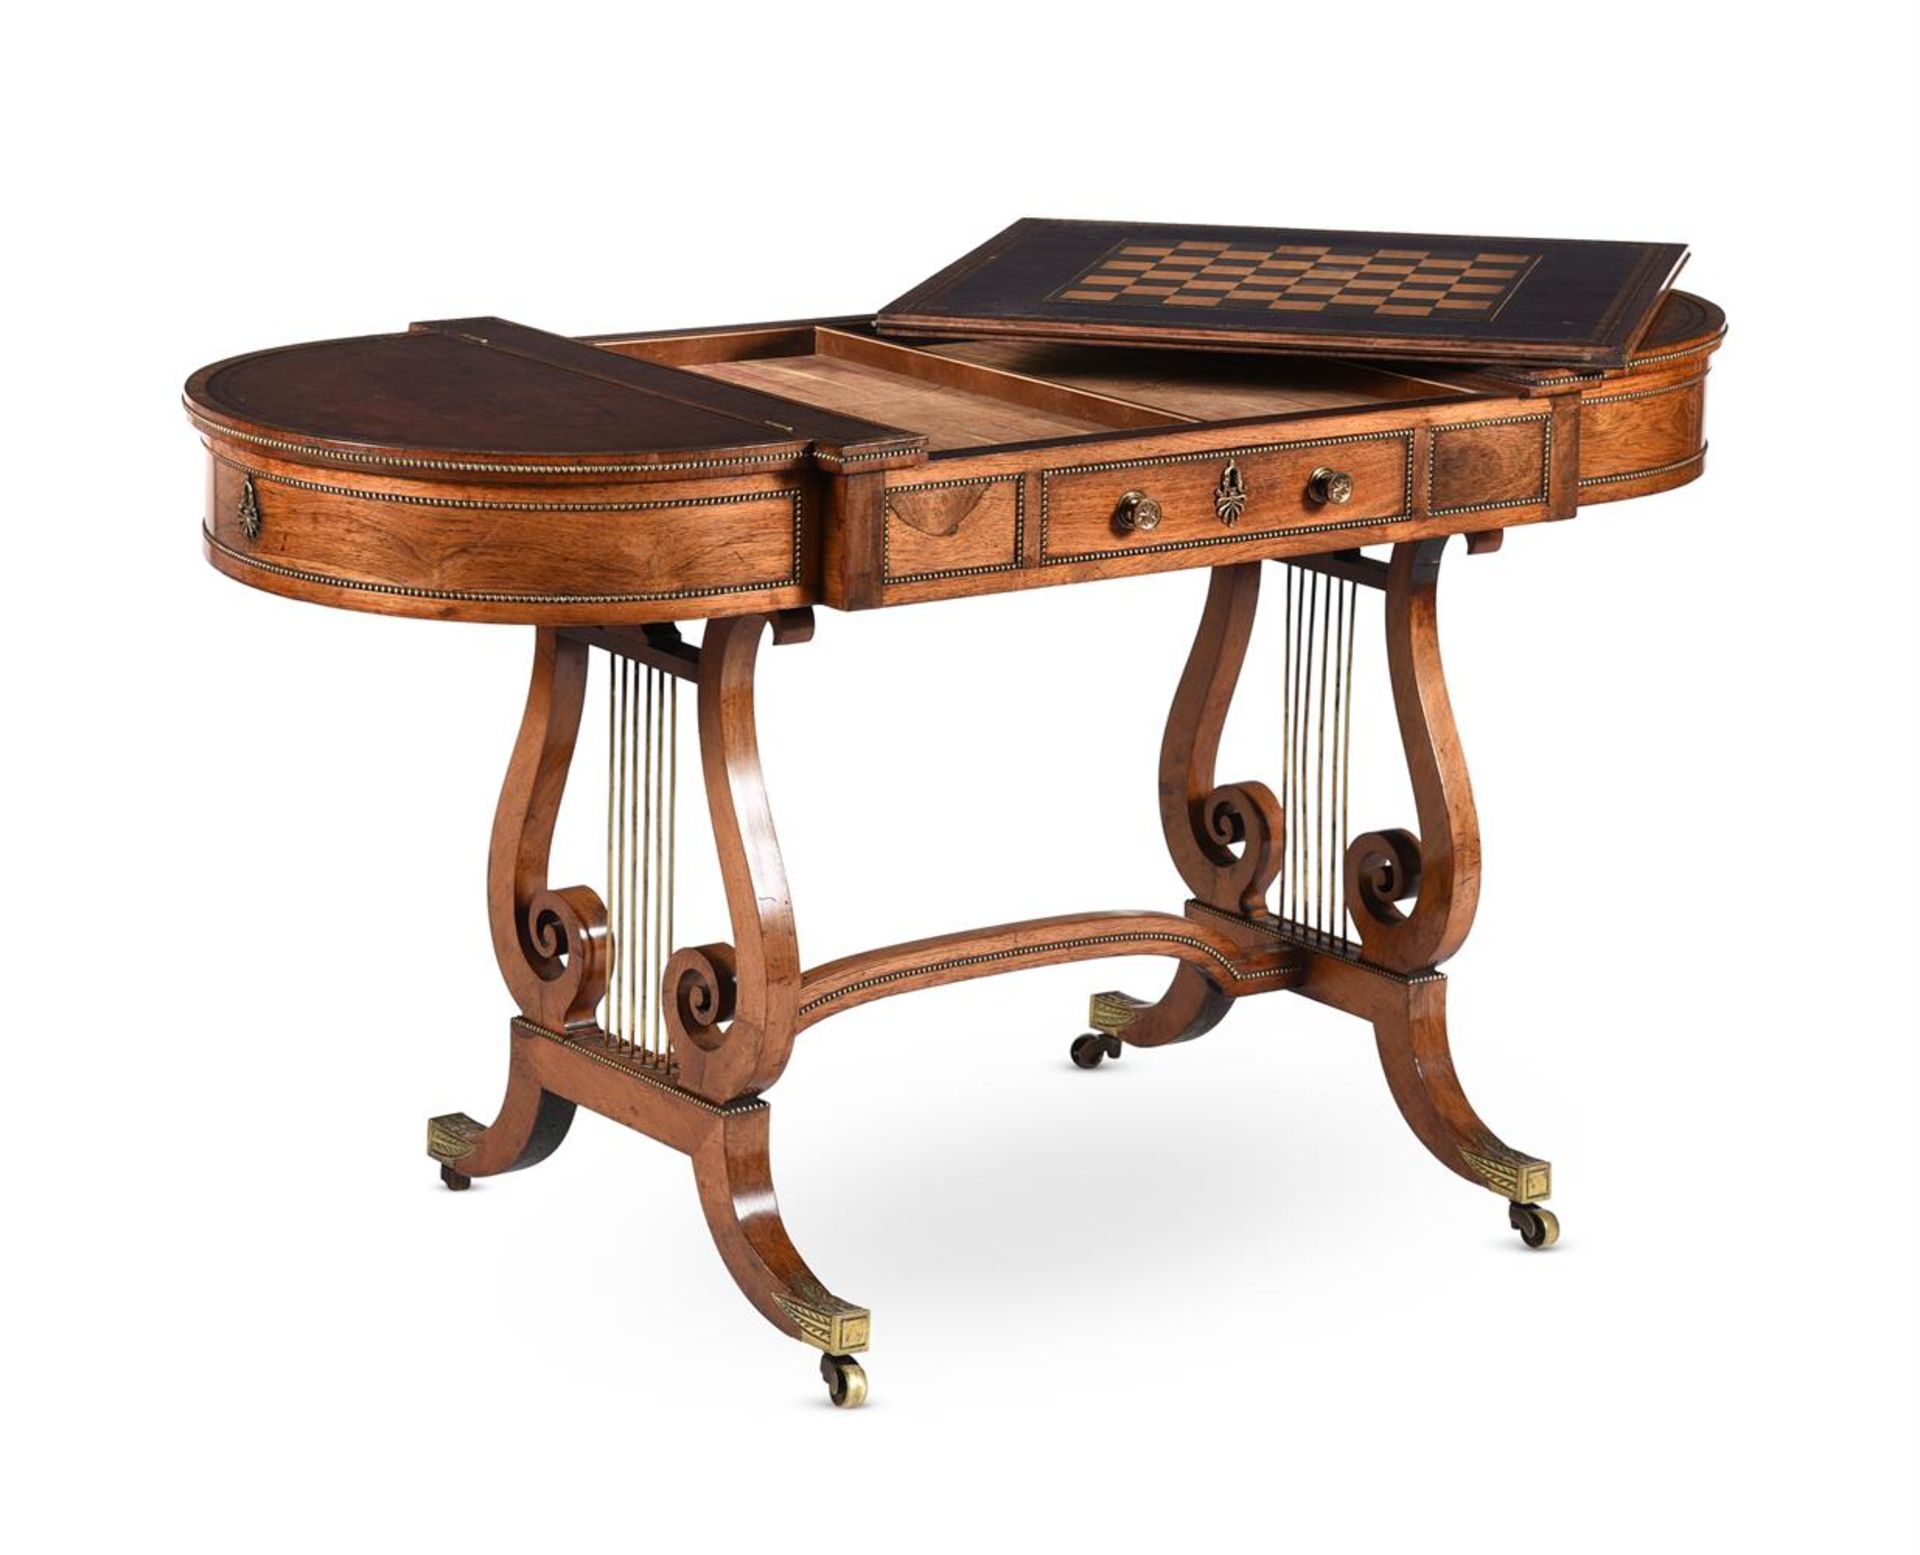 Y A REGENCY ROSEWOOD AND GILT METAL MOUNTED WRITING AND GAMES TABLE, ATTRIBUTED TO GILLOWS - Image 3 of 10